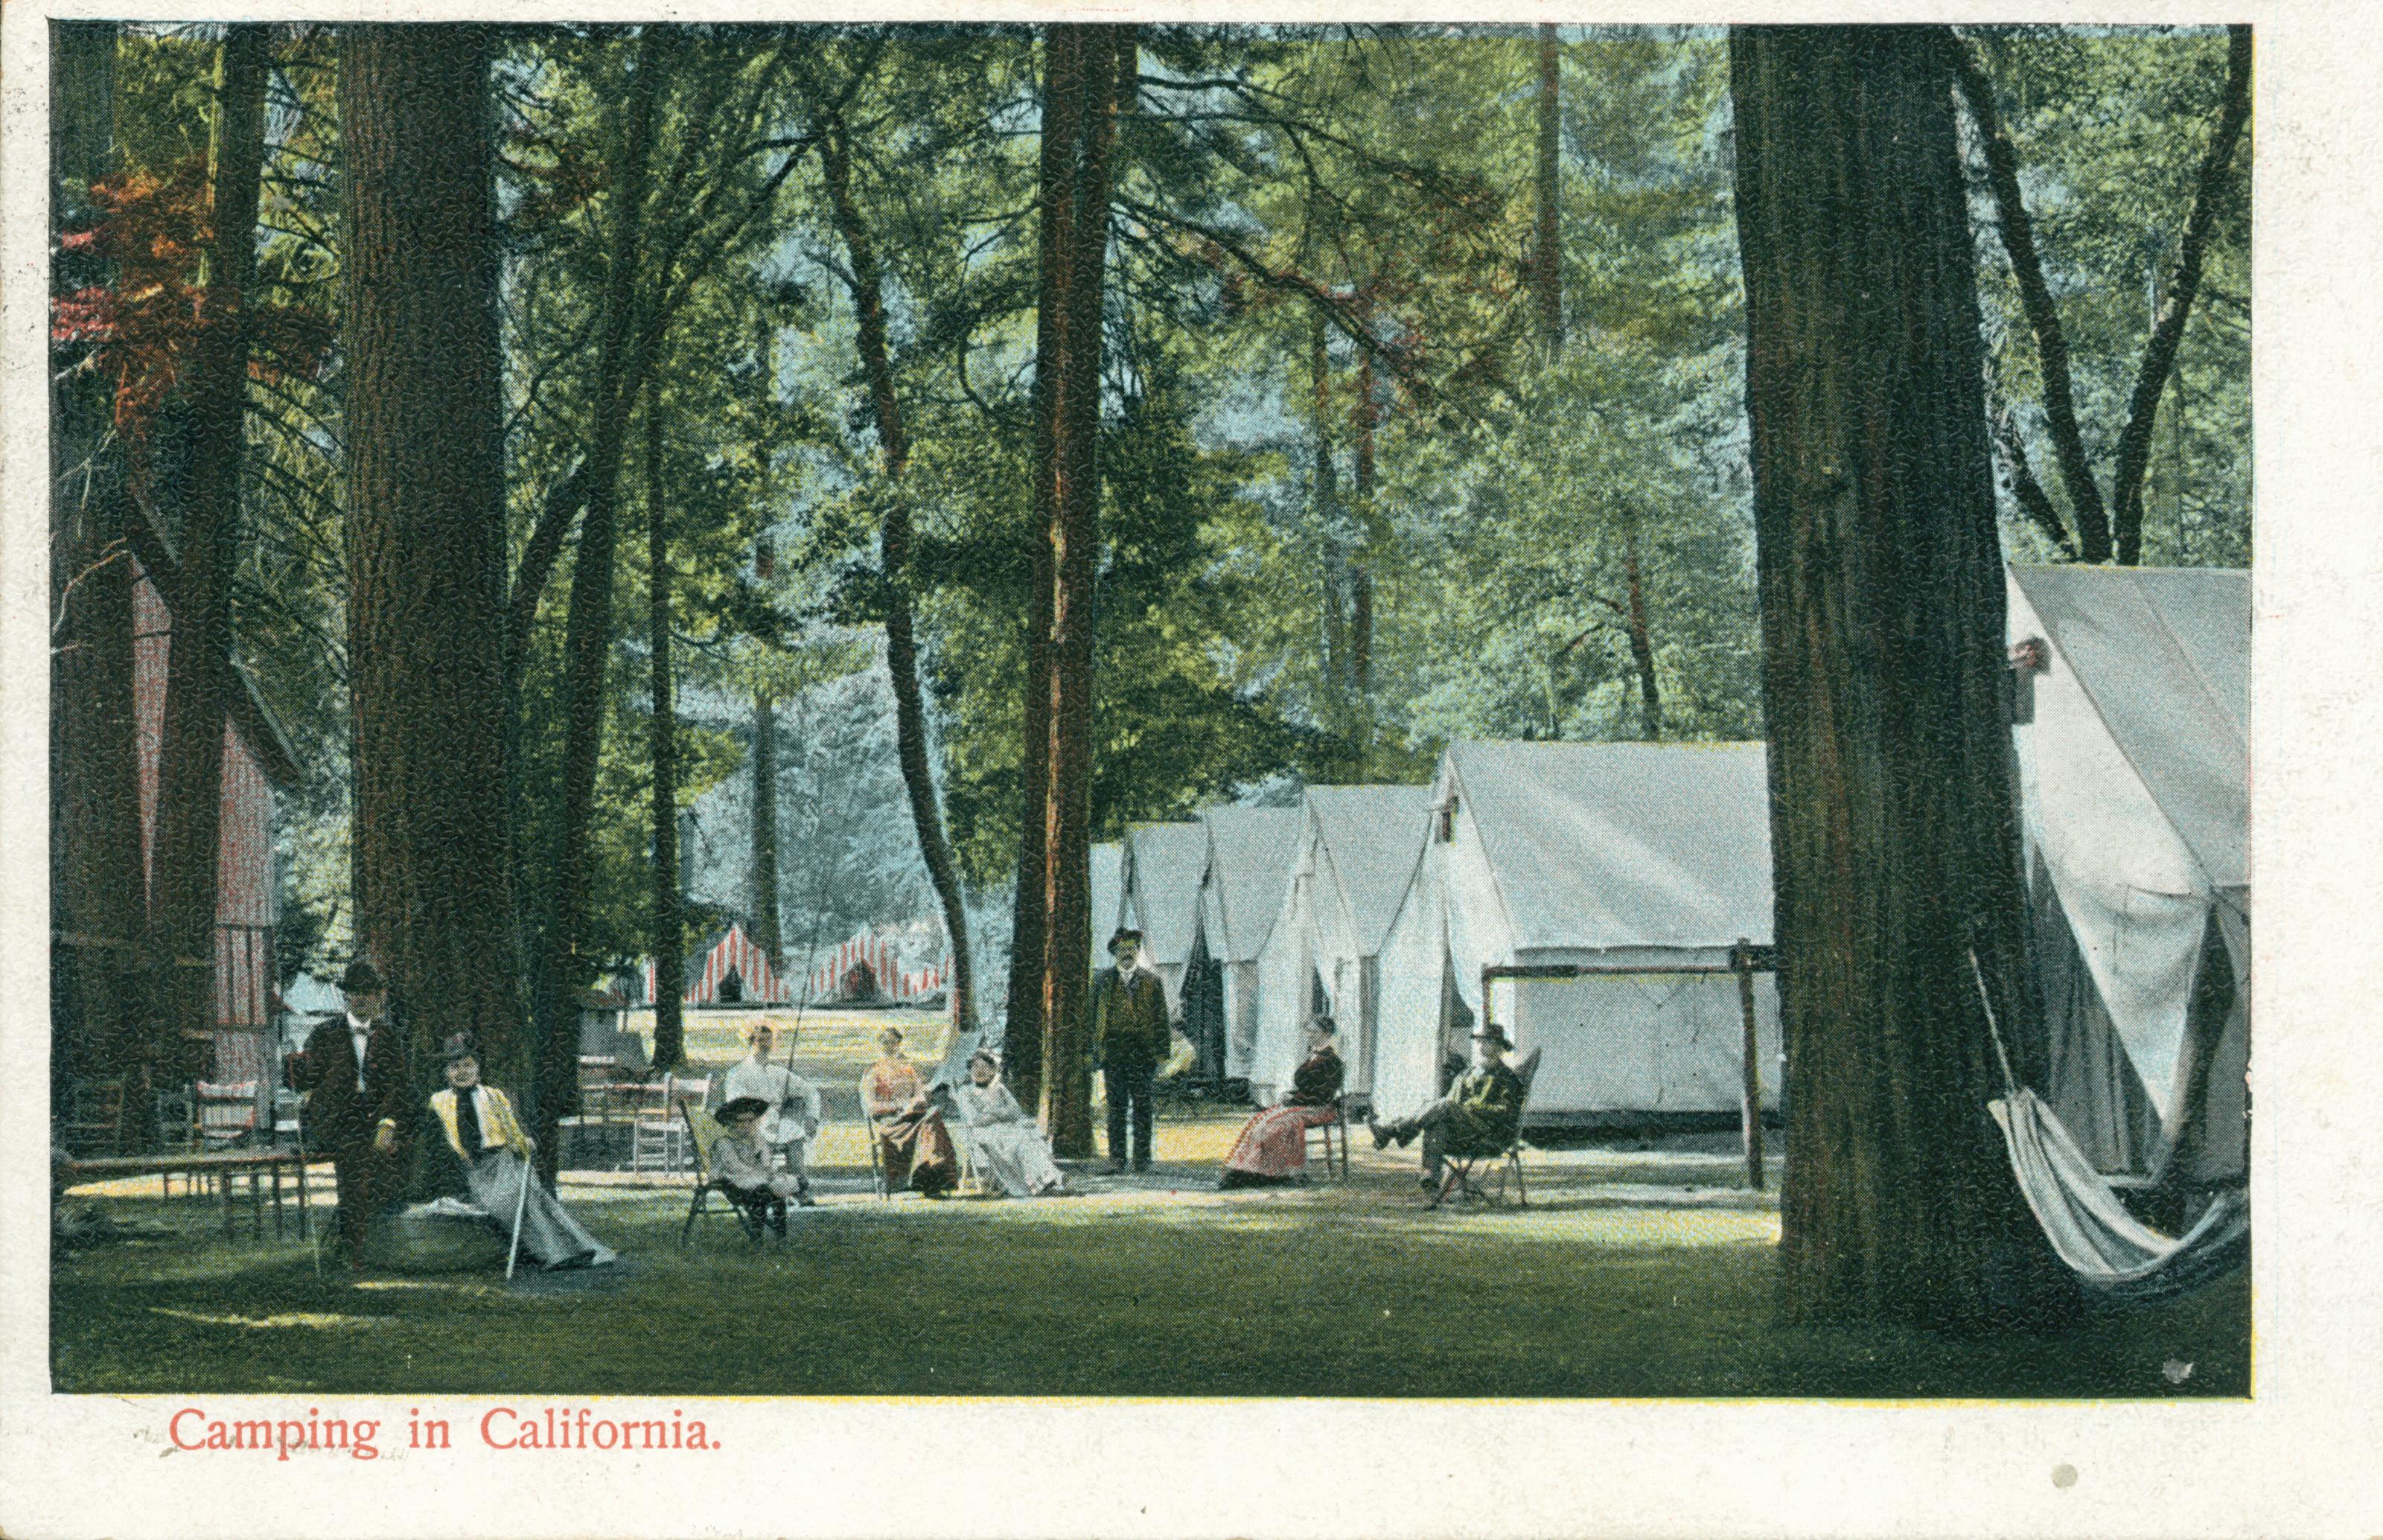 Shows a row of tents nestled between the trees in Camp Curry, with several people relaxing in chairs